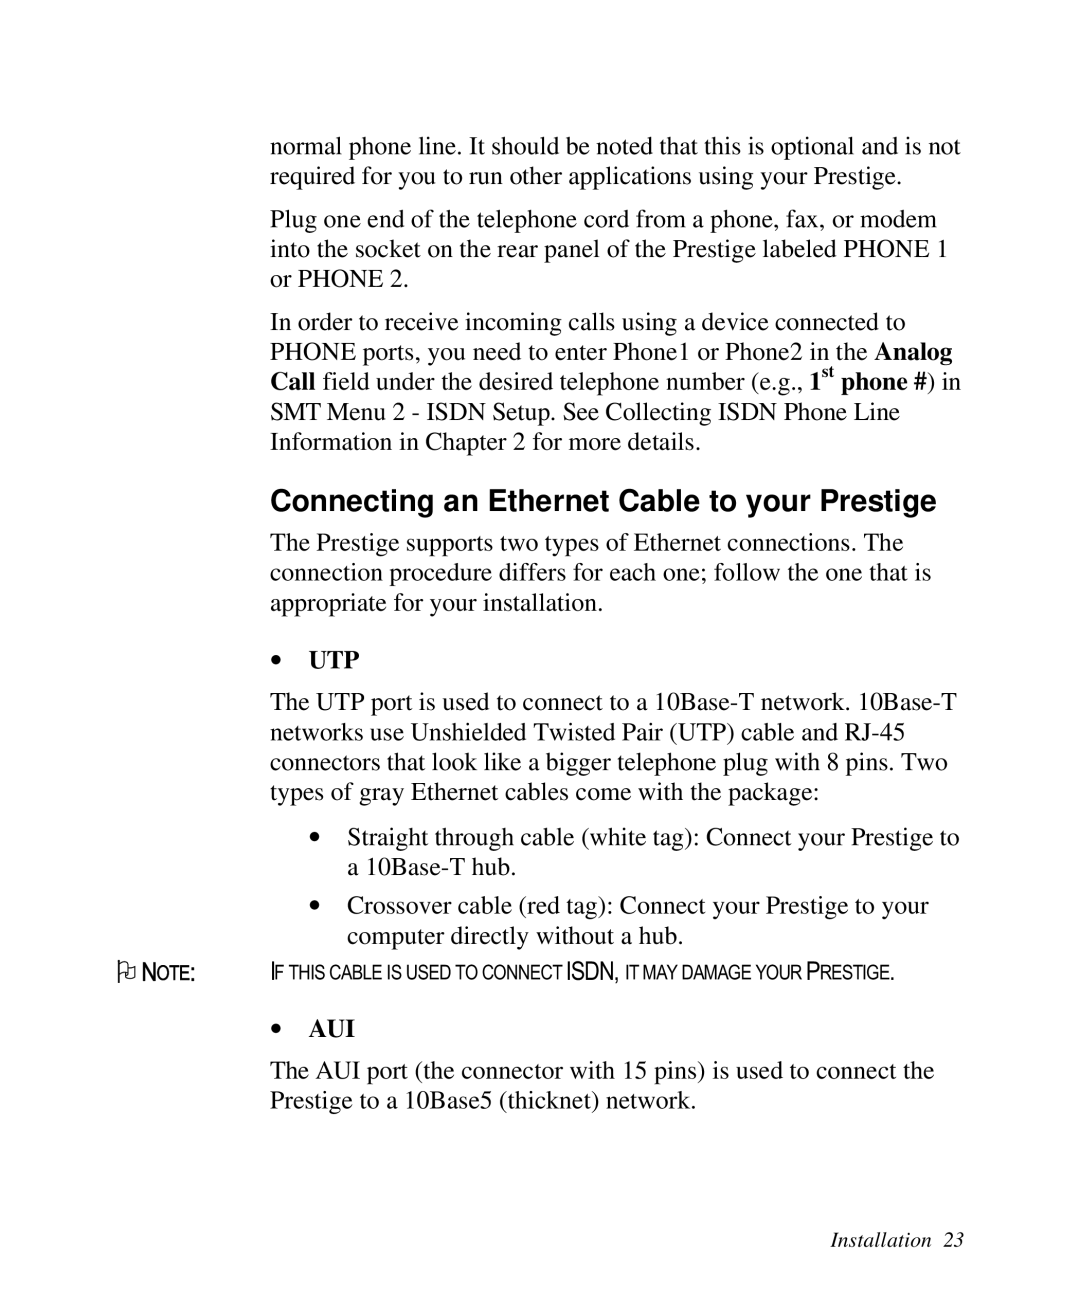 ZyXEL Communications Prestige 128 user manual Connecting an Ethernet Cable to your Prestige, ∙ Utp, ∙ Aui 